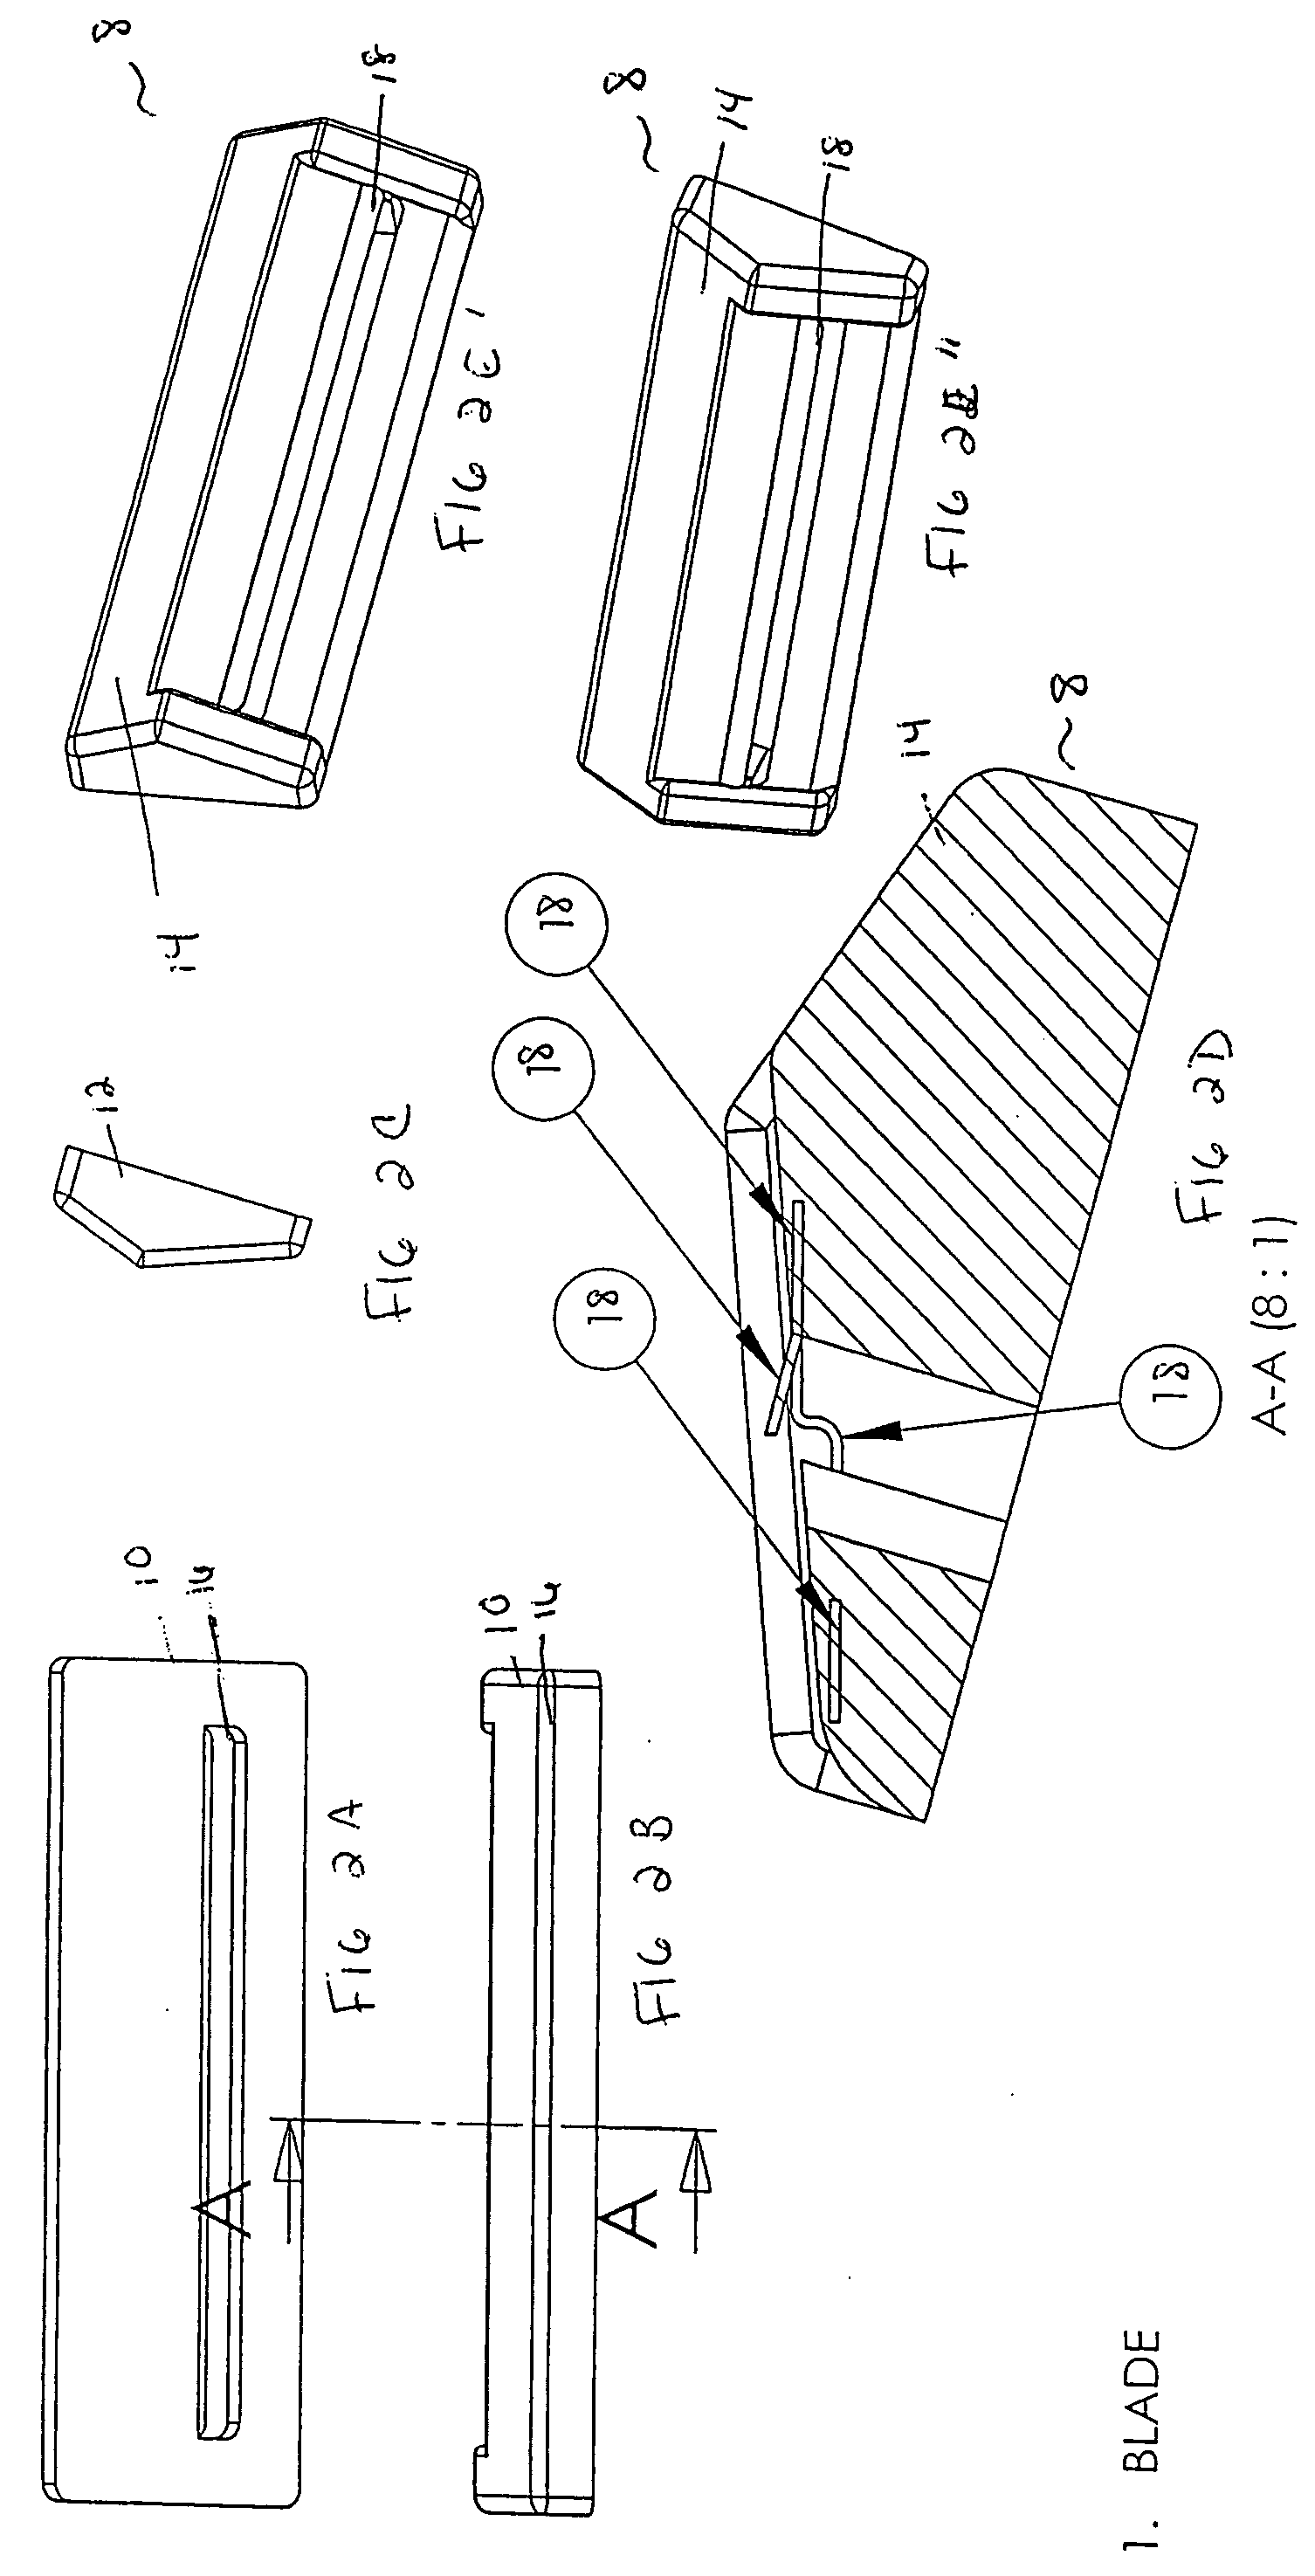 Method and apparatus for making a razor safe